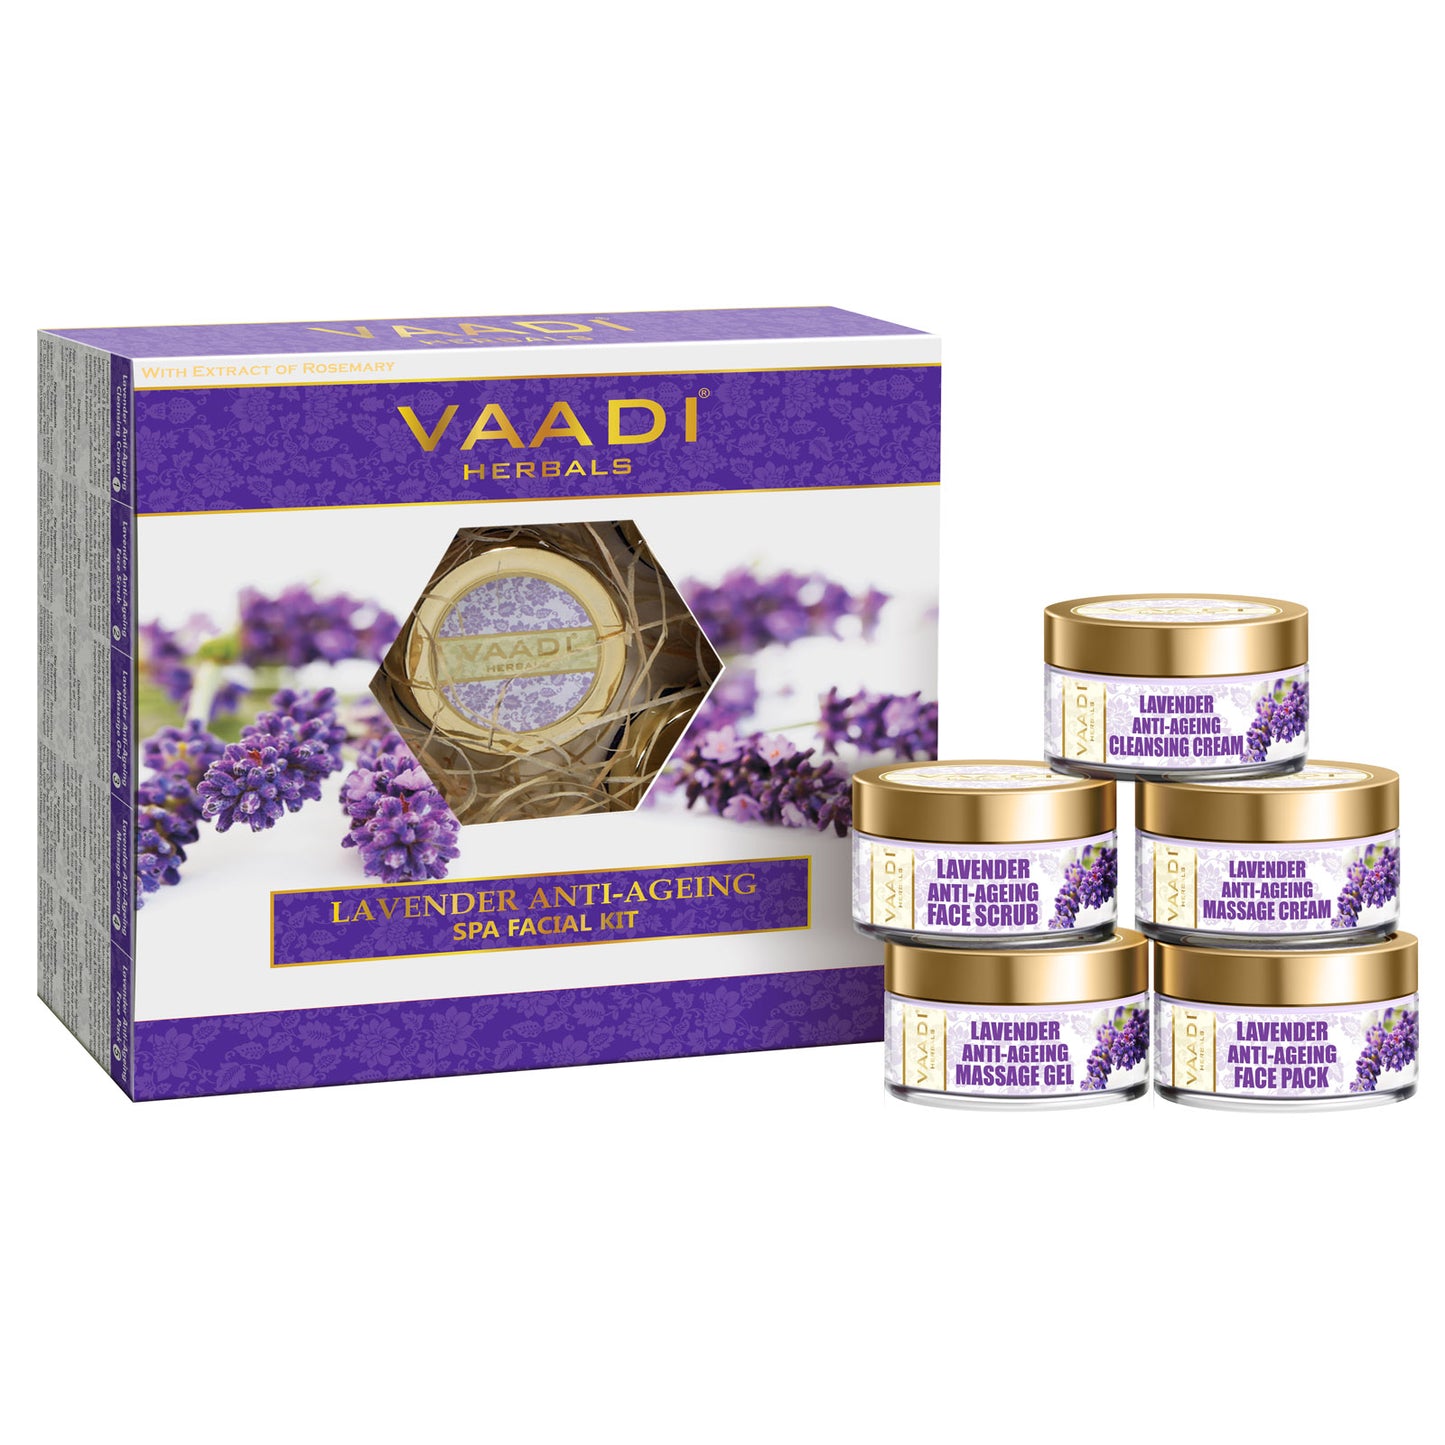 Lavender Anti-Ageing SPA Facial Kit with Rosemary Extract (270 gms)